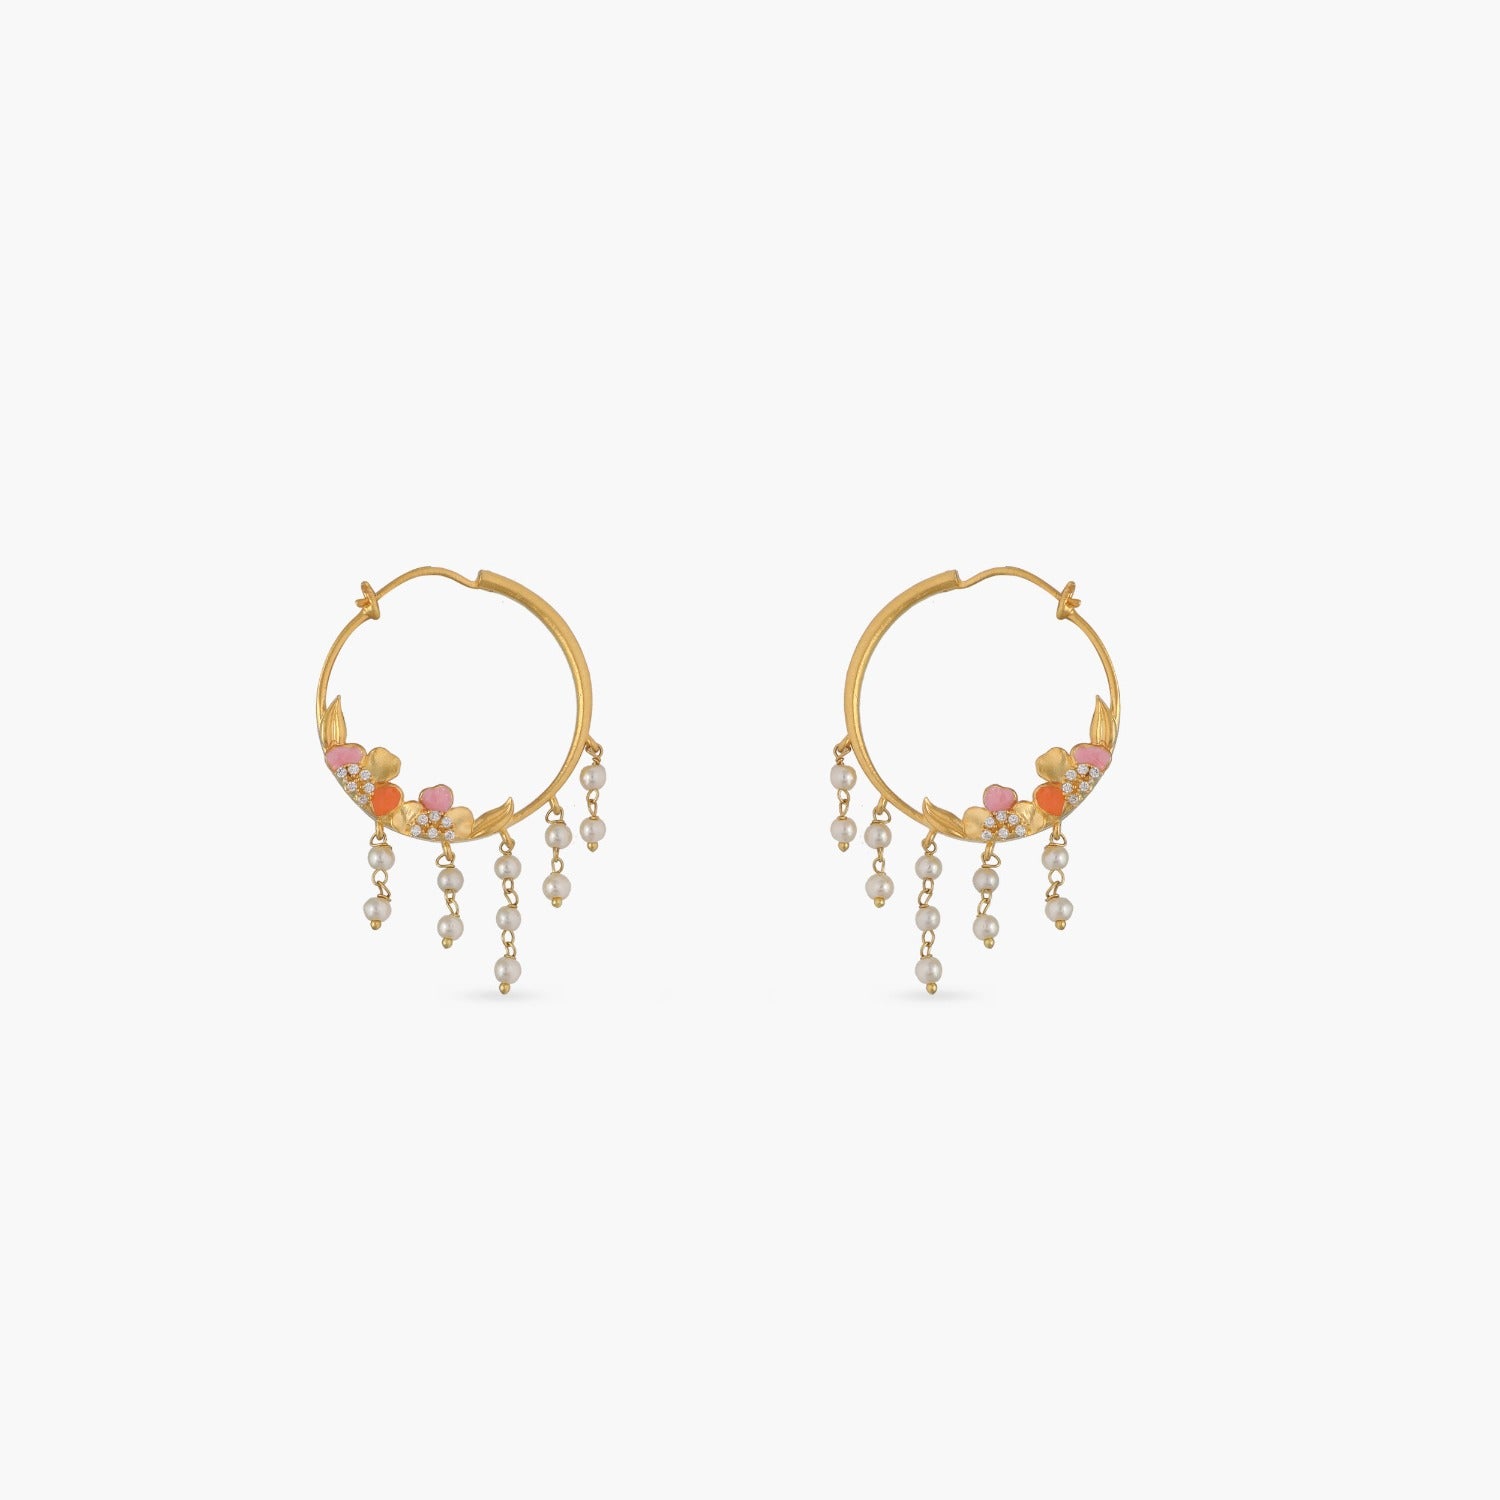 Gold Hoop Earrings  Gold earrings designs Gold jewellery design  necklaces Gold jewelry stores